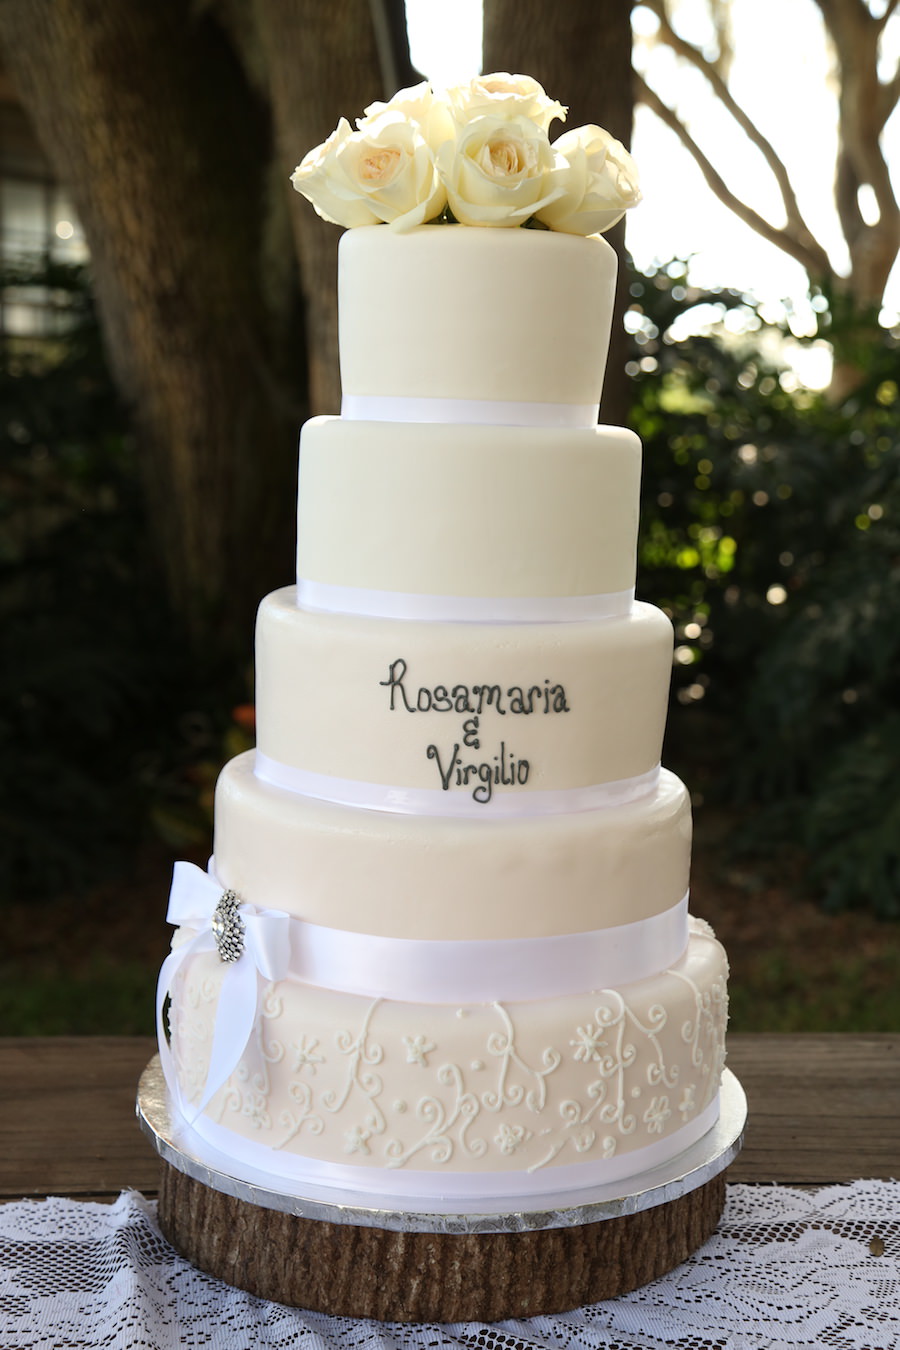 Five Tiered White Classic Round Wedding Cake with Bride and Groom Name